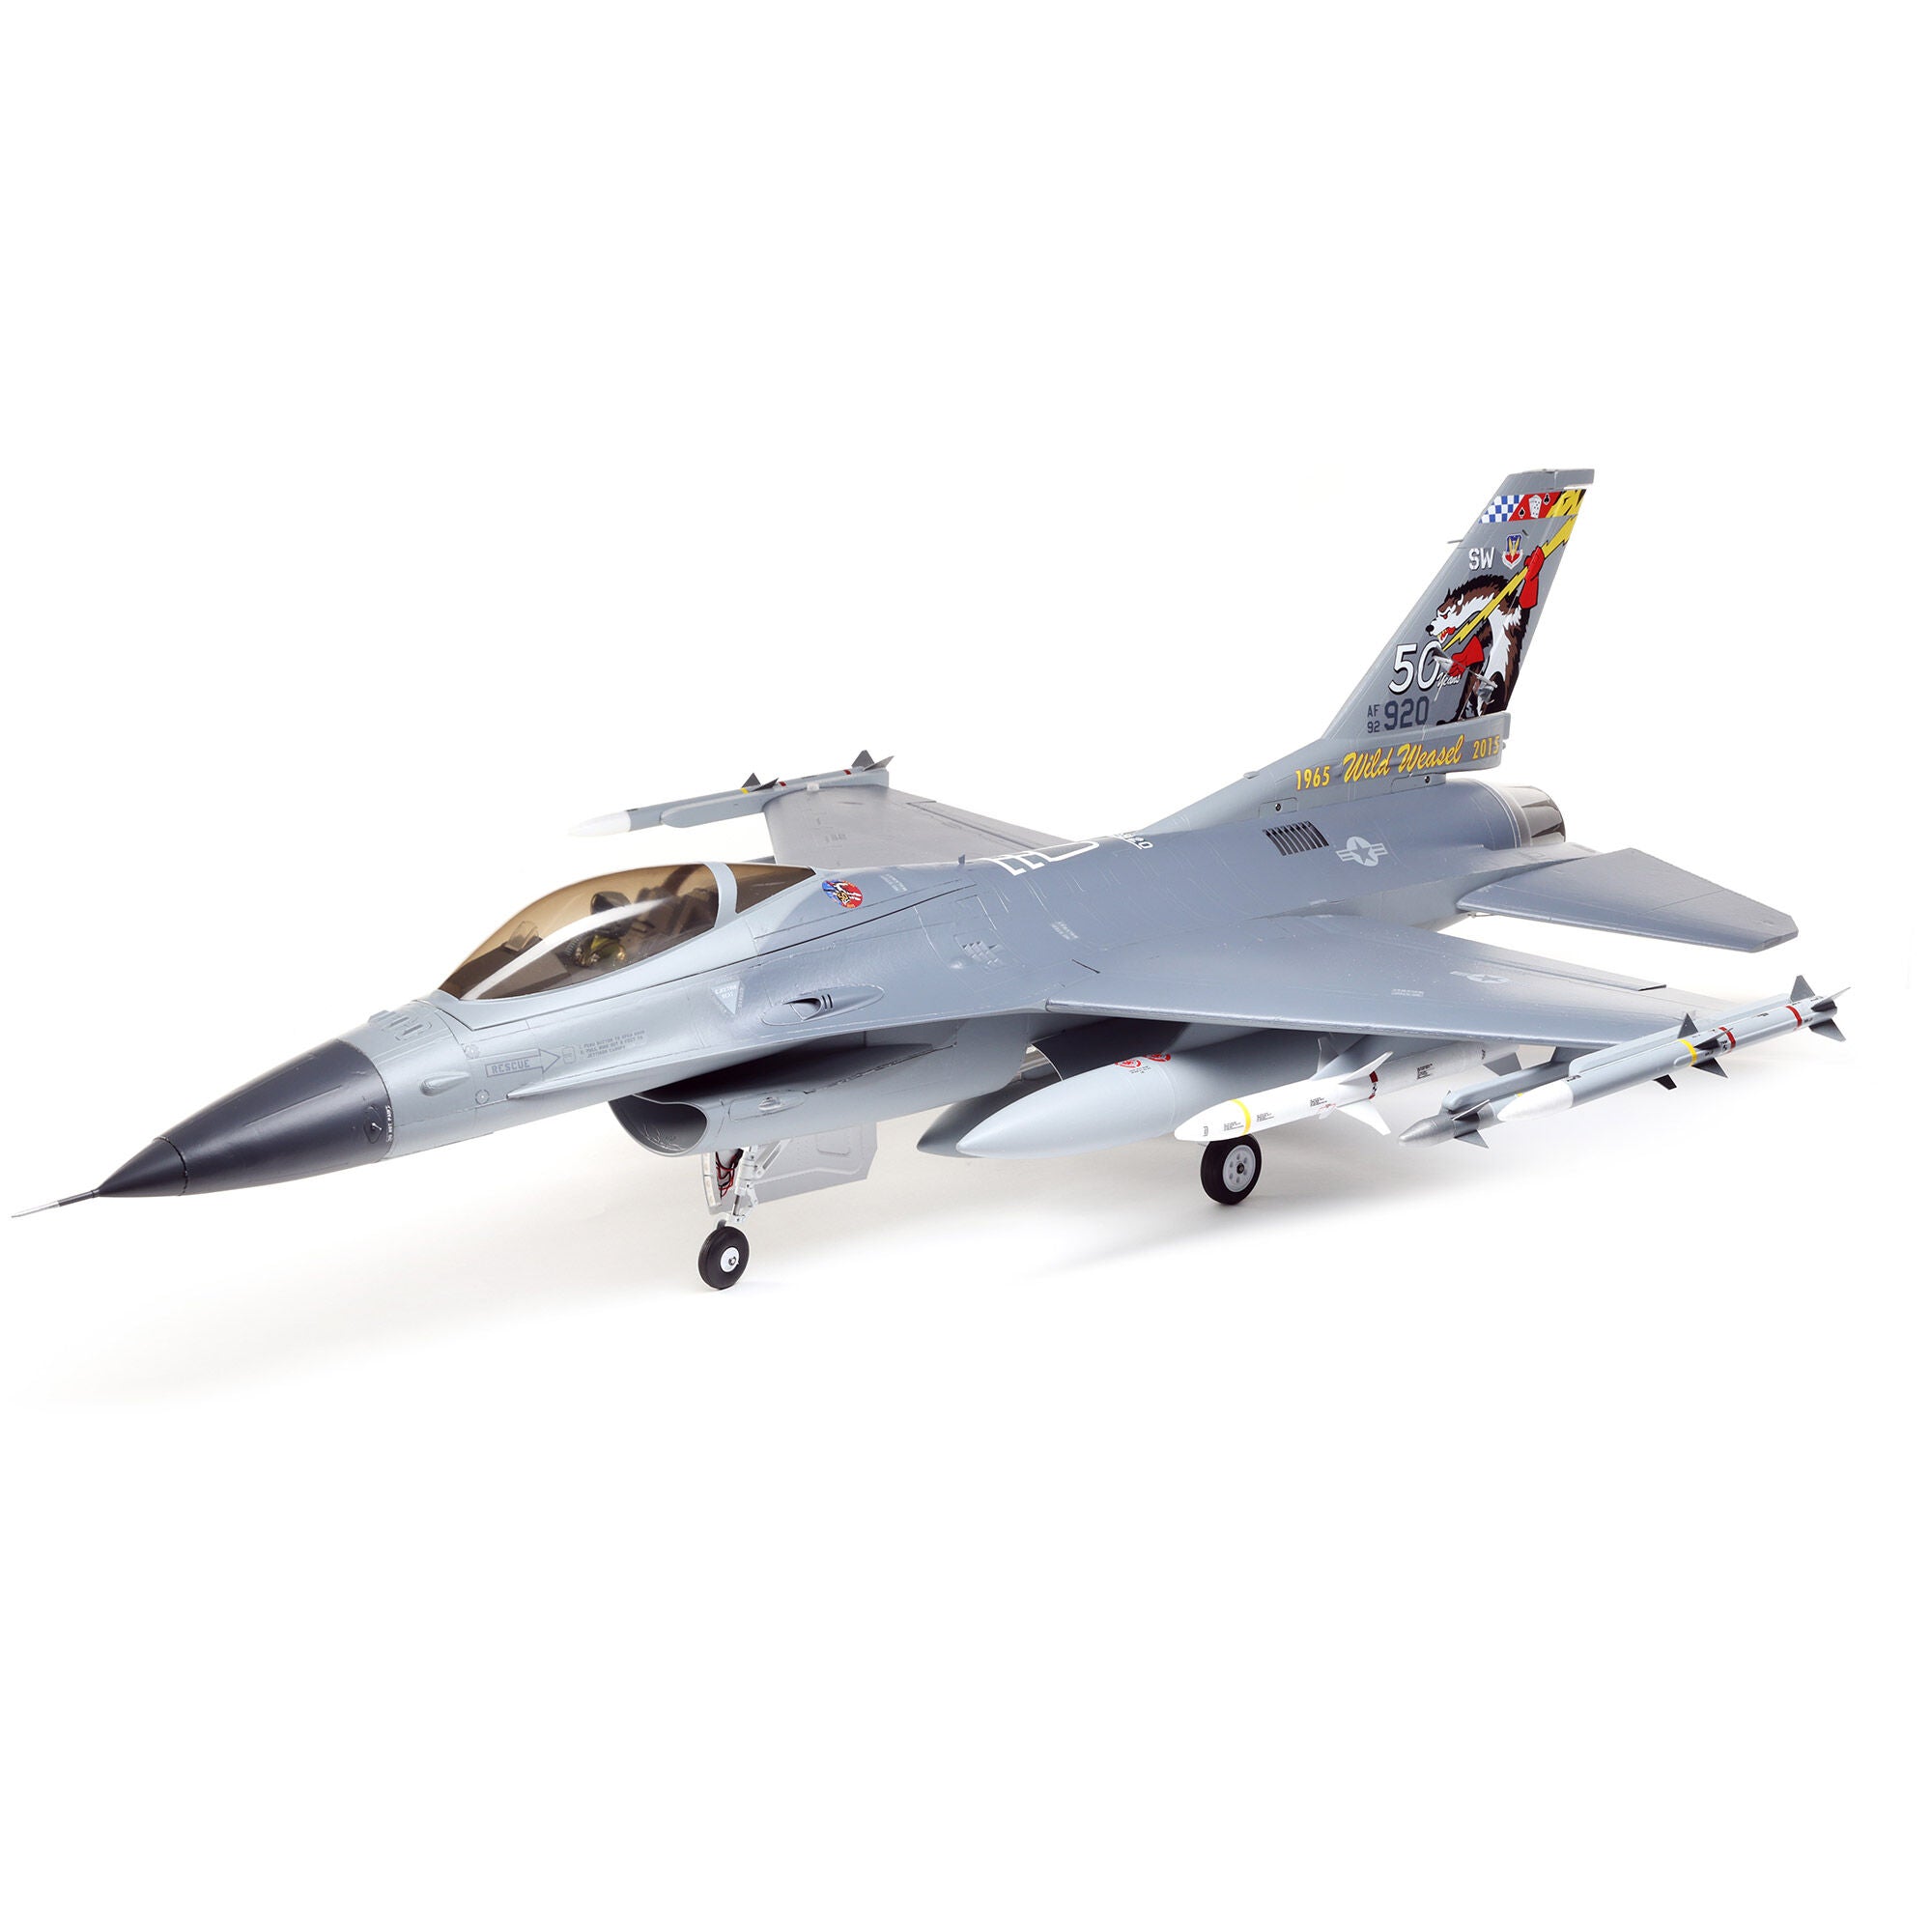 EFLITE EFL87850 F-16 Falcon 80mm EDF Jet Smart BNF Basic with SAFE Select, 1000mm